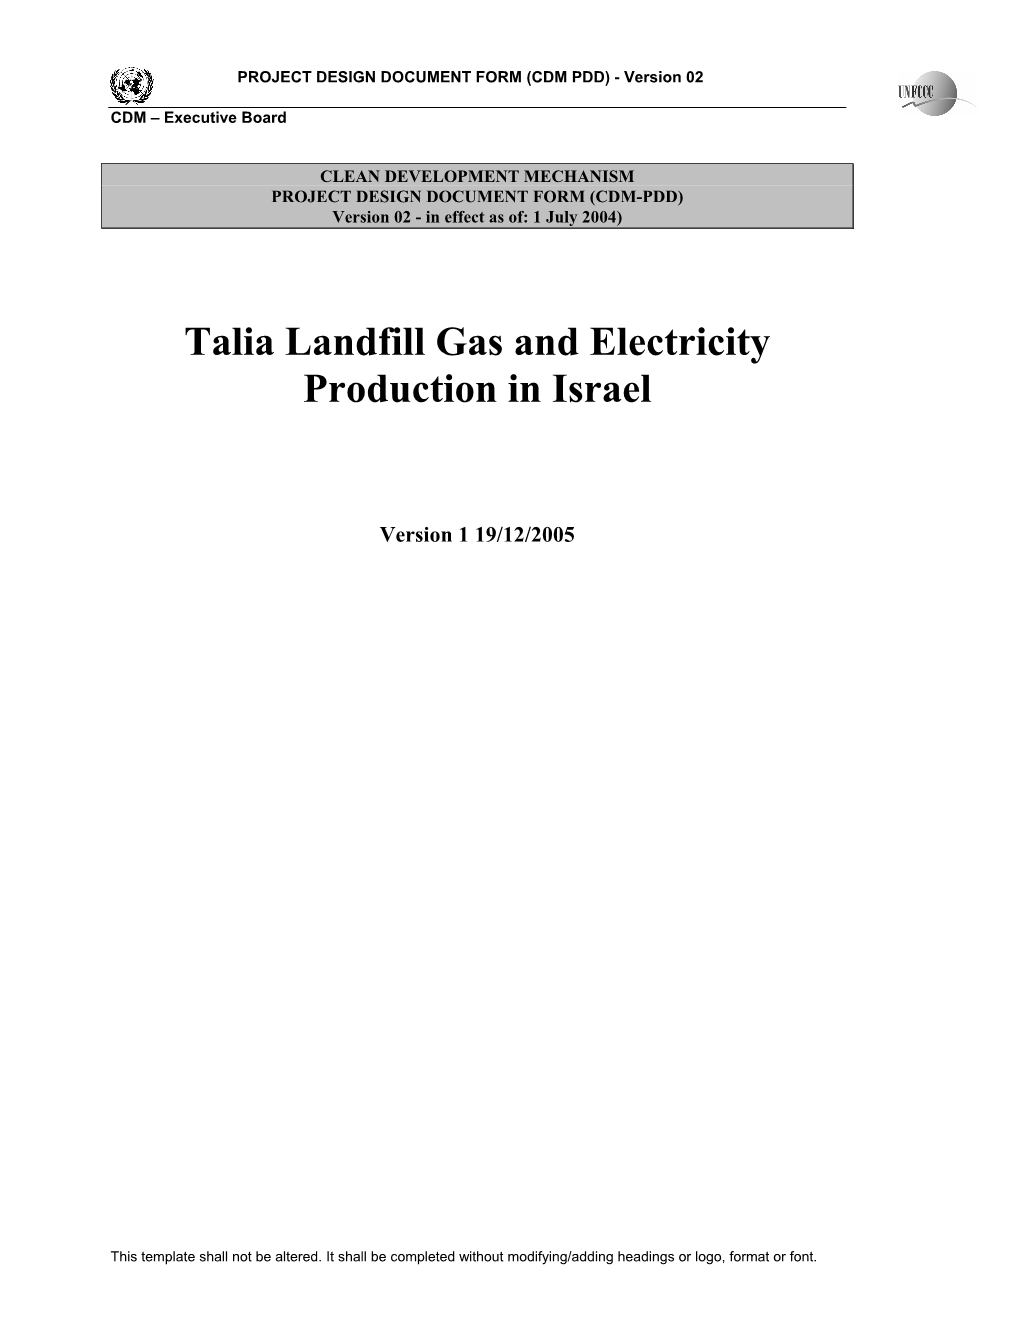 Talia Landfill Gas and Electricity Production in Israel